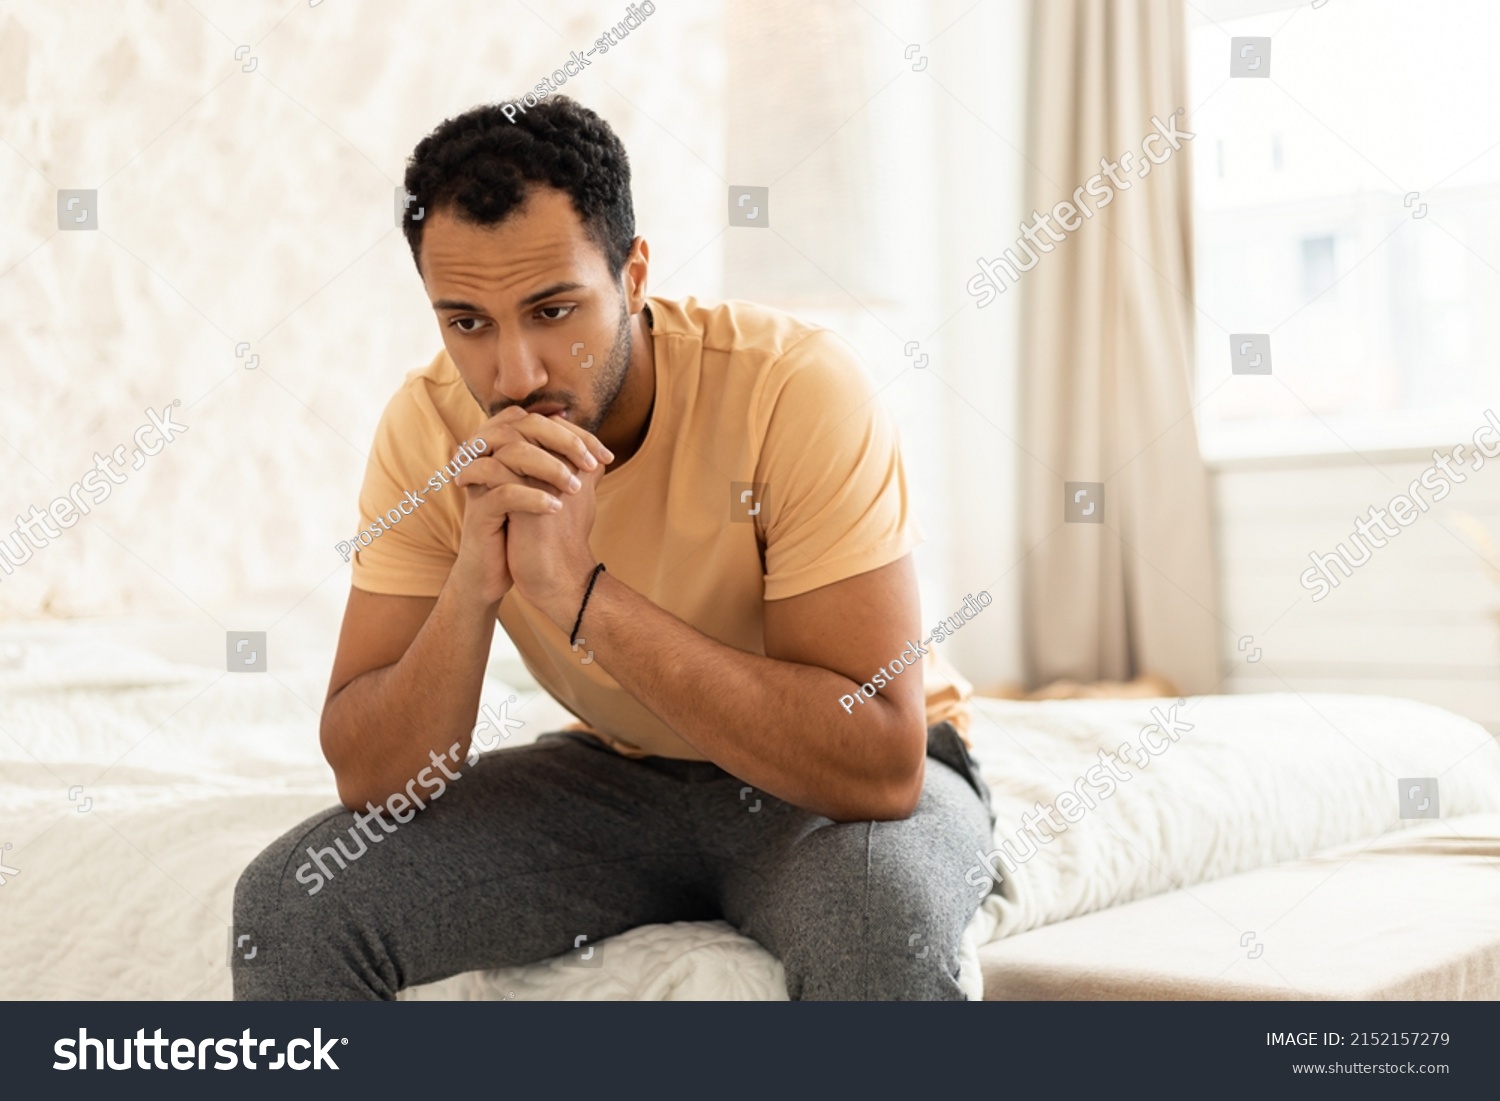 Depressed Middle Eastern Man Suffering From Frustration And Insomnia Sitting Thinking About His Problems In Modern Bedroom At Home. Unhappiness And Stress, Male Depression Concept #2152157279